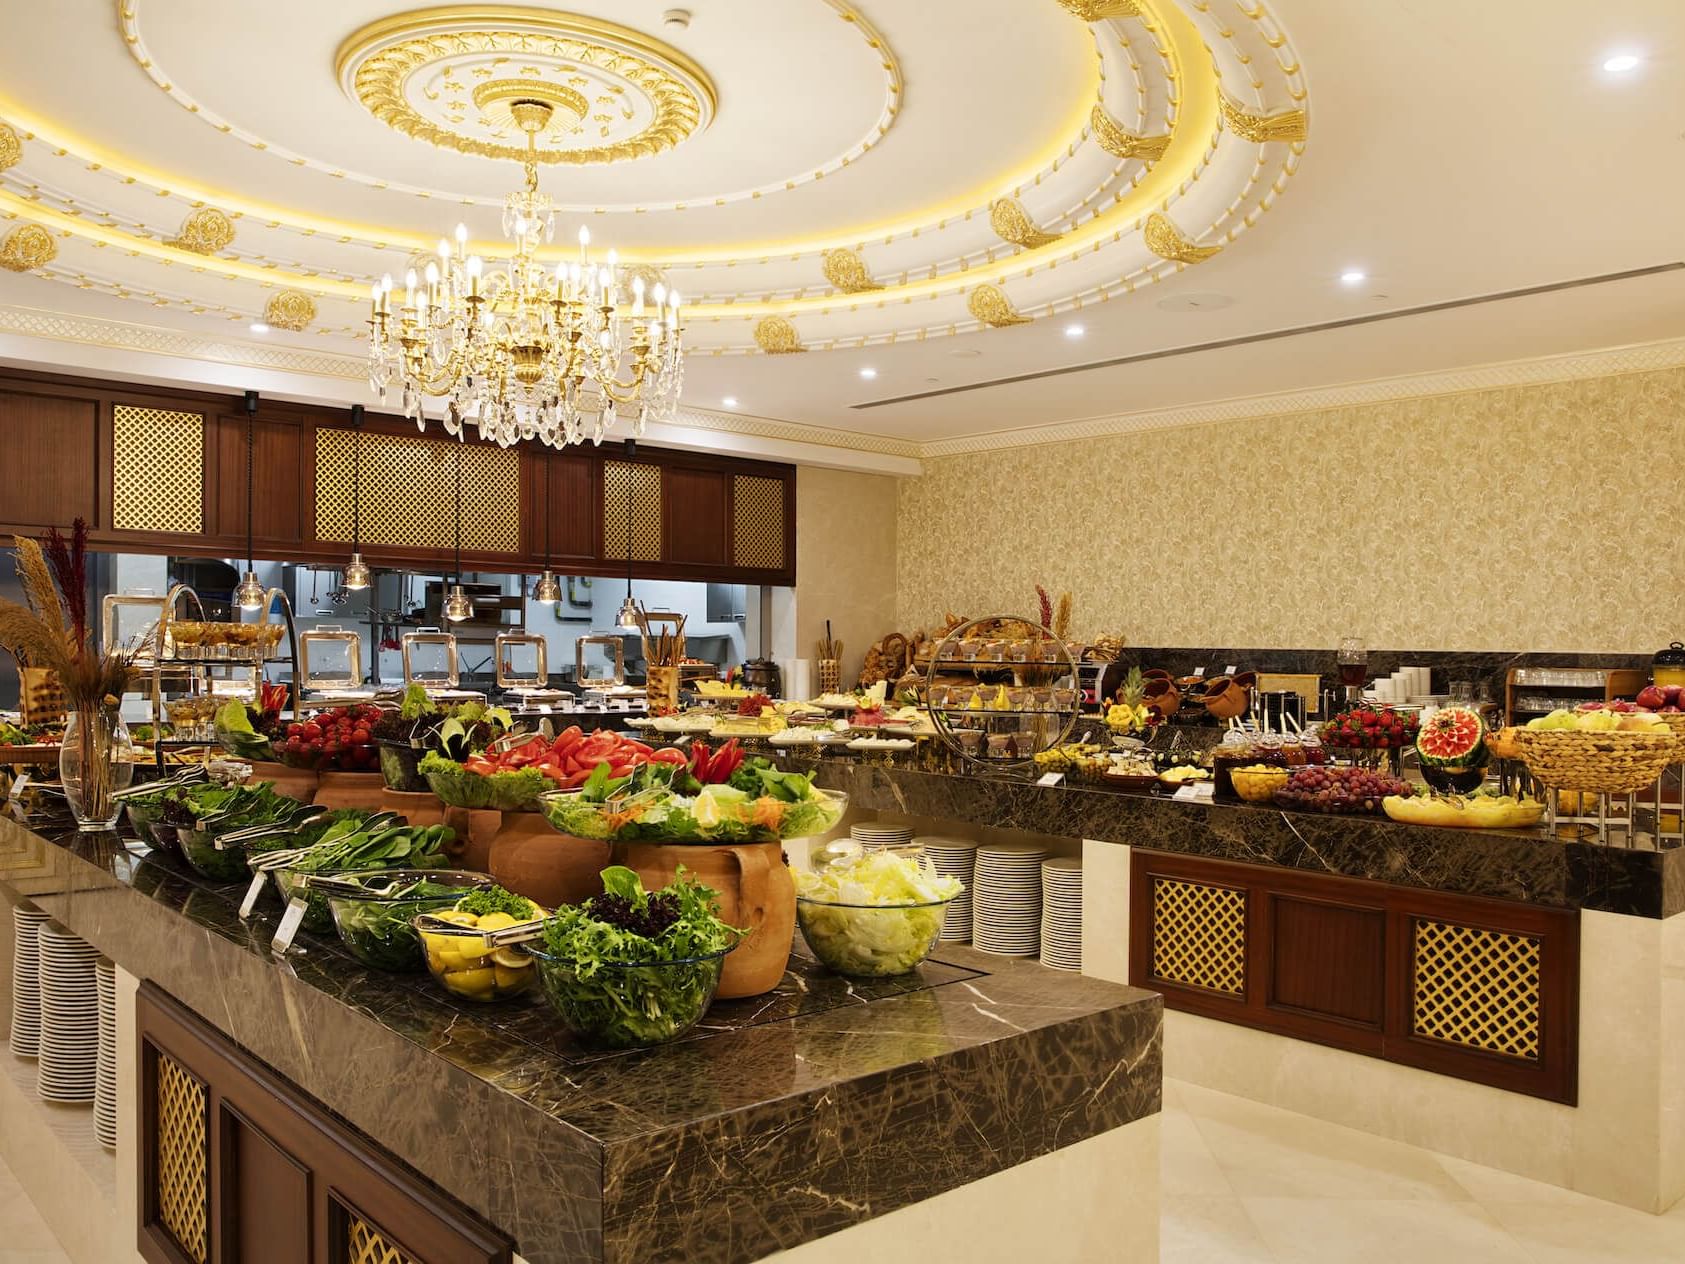 Foods in Sultan Restaurant buffet at Ottomans life Deluxe Hotel